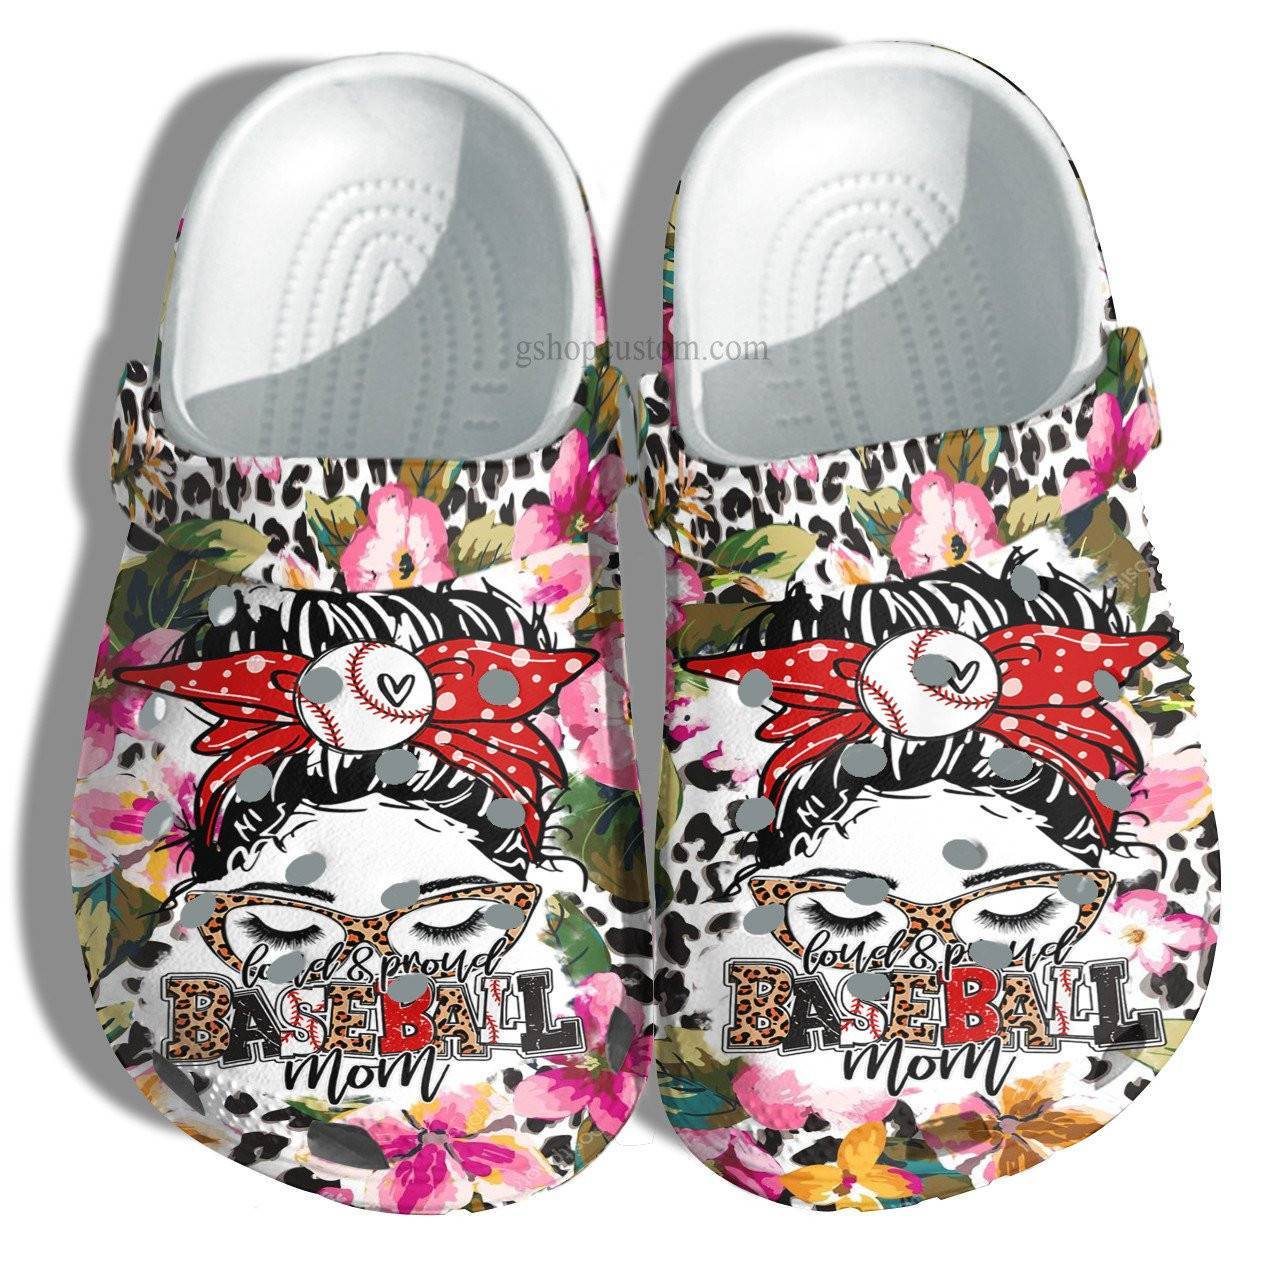 Baseball Mom Flower Cow Crocss Shoes For Wife Mom Grandma – Baseball Mom Cow Crocss Shoes Croc Clogs